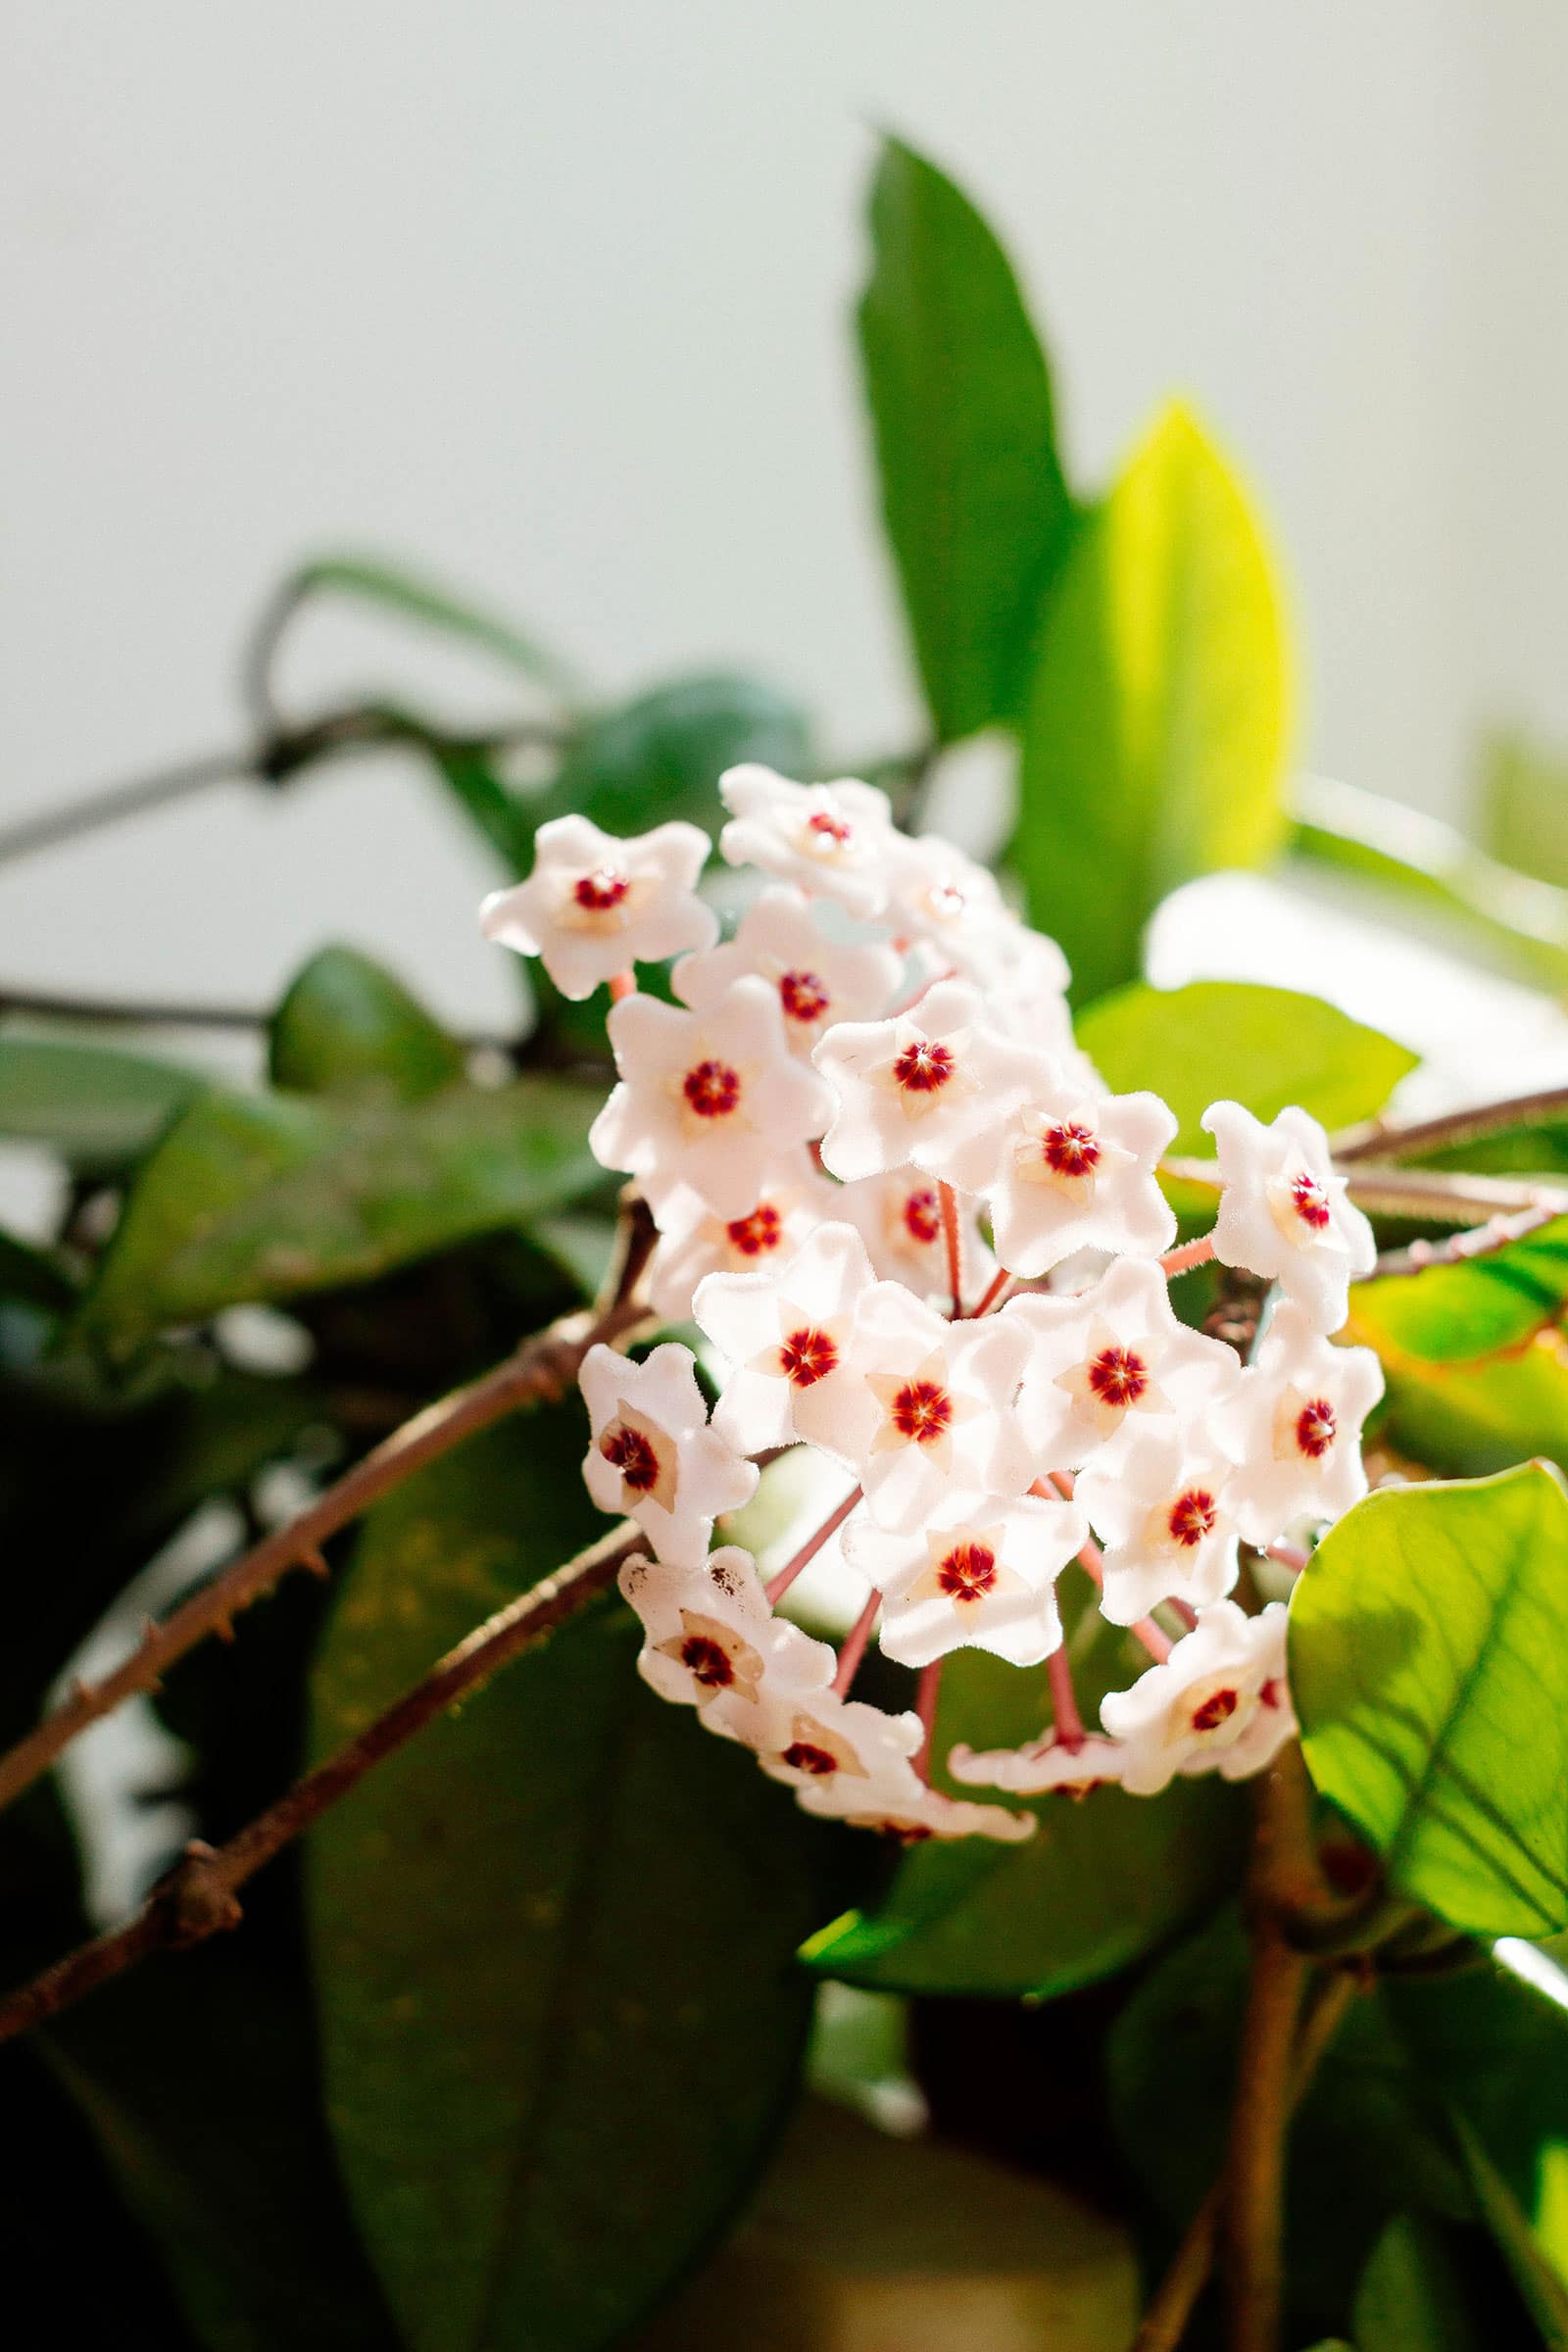 Hoya carnosa (wax pant) in bloom with tiny white flowers